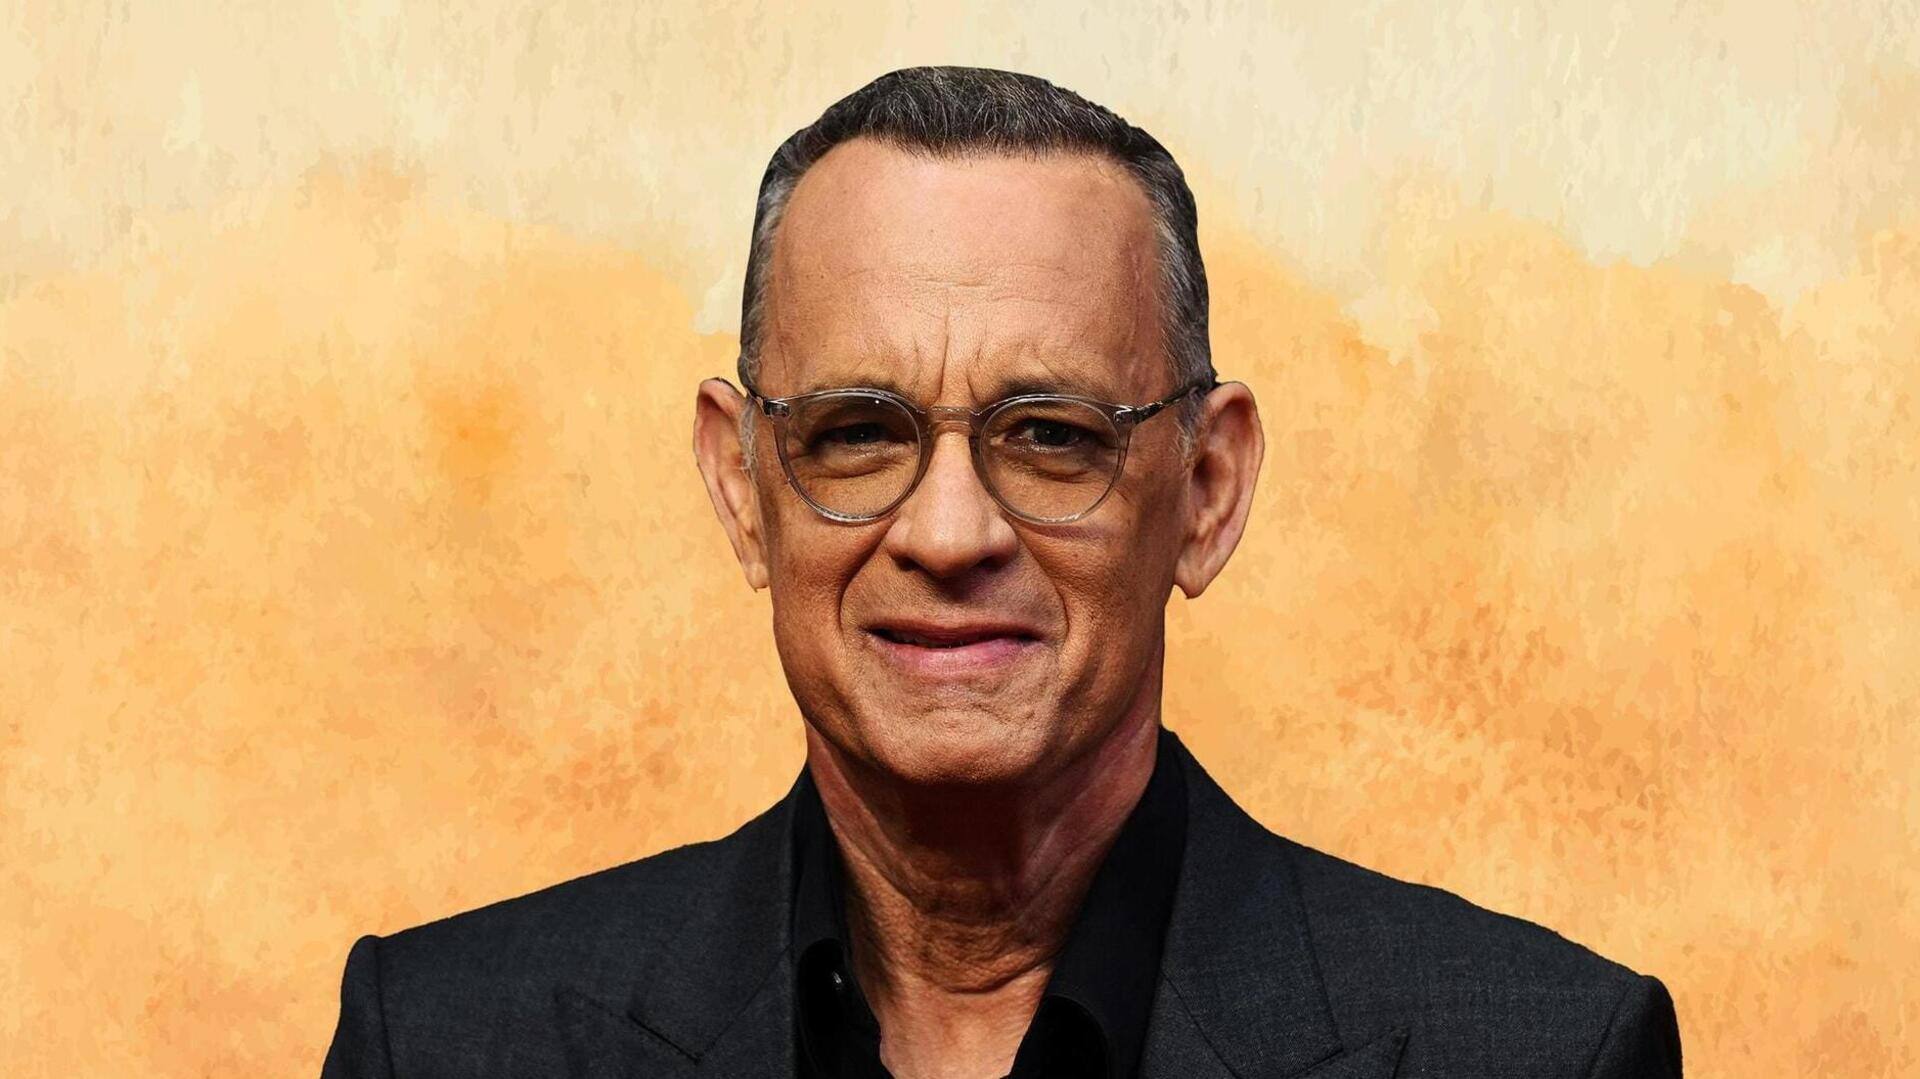 Tom Hanks says fake AI-generated likeness was used in advertisement